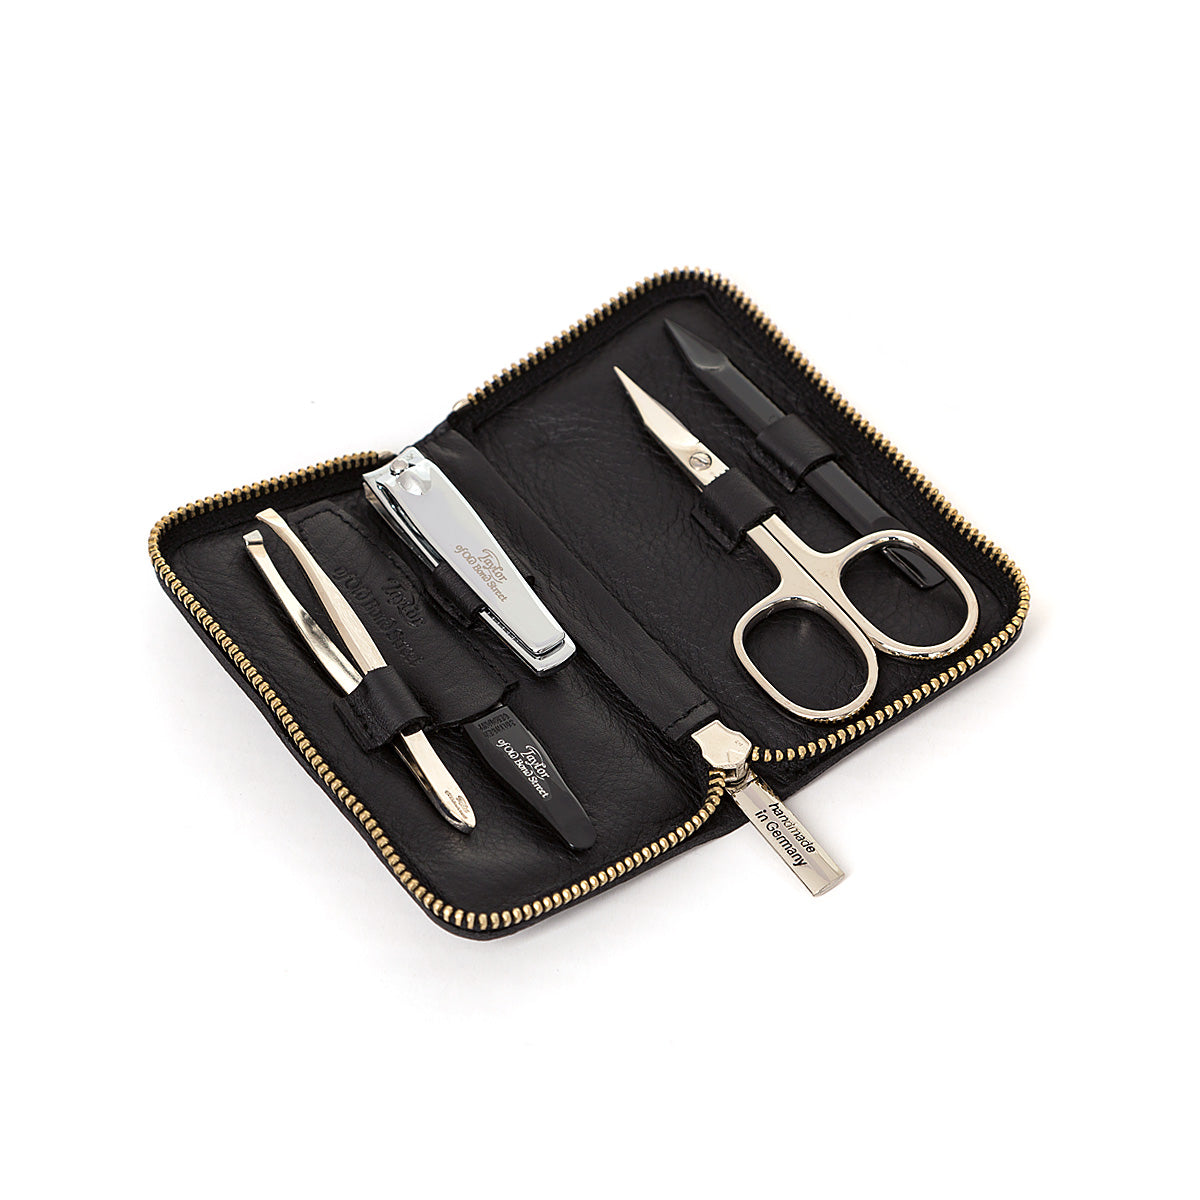 Rainbow Stainless Steel Set Of Manicure Tools With Portable Hand And Foot  Clippers, Cuticle Nipper, And Drop Delivery Health And Beauty Essential  Dhet8 From Fyllhair, $7.02 | DHgate.Com